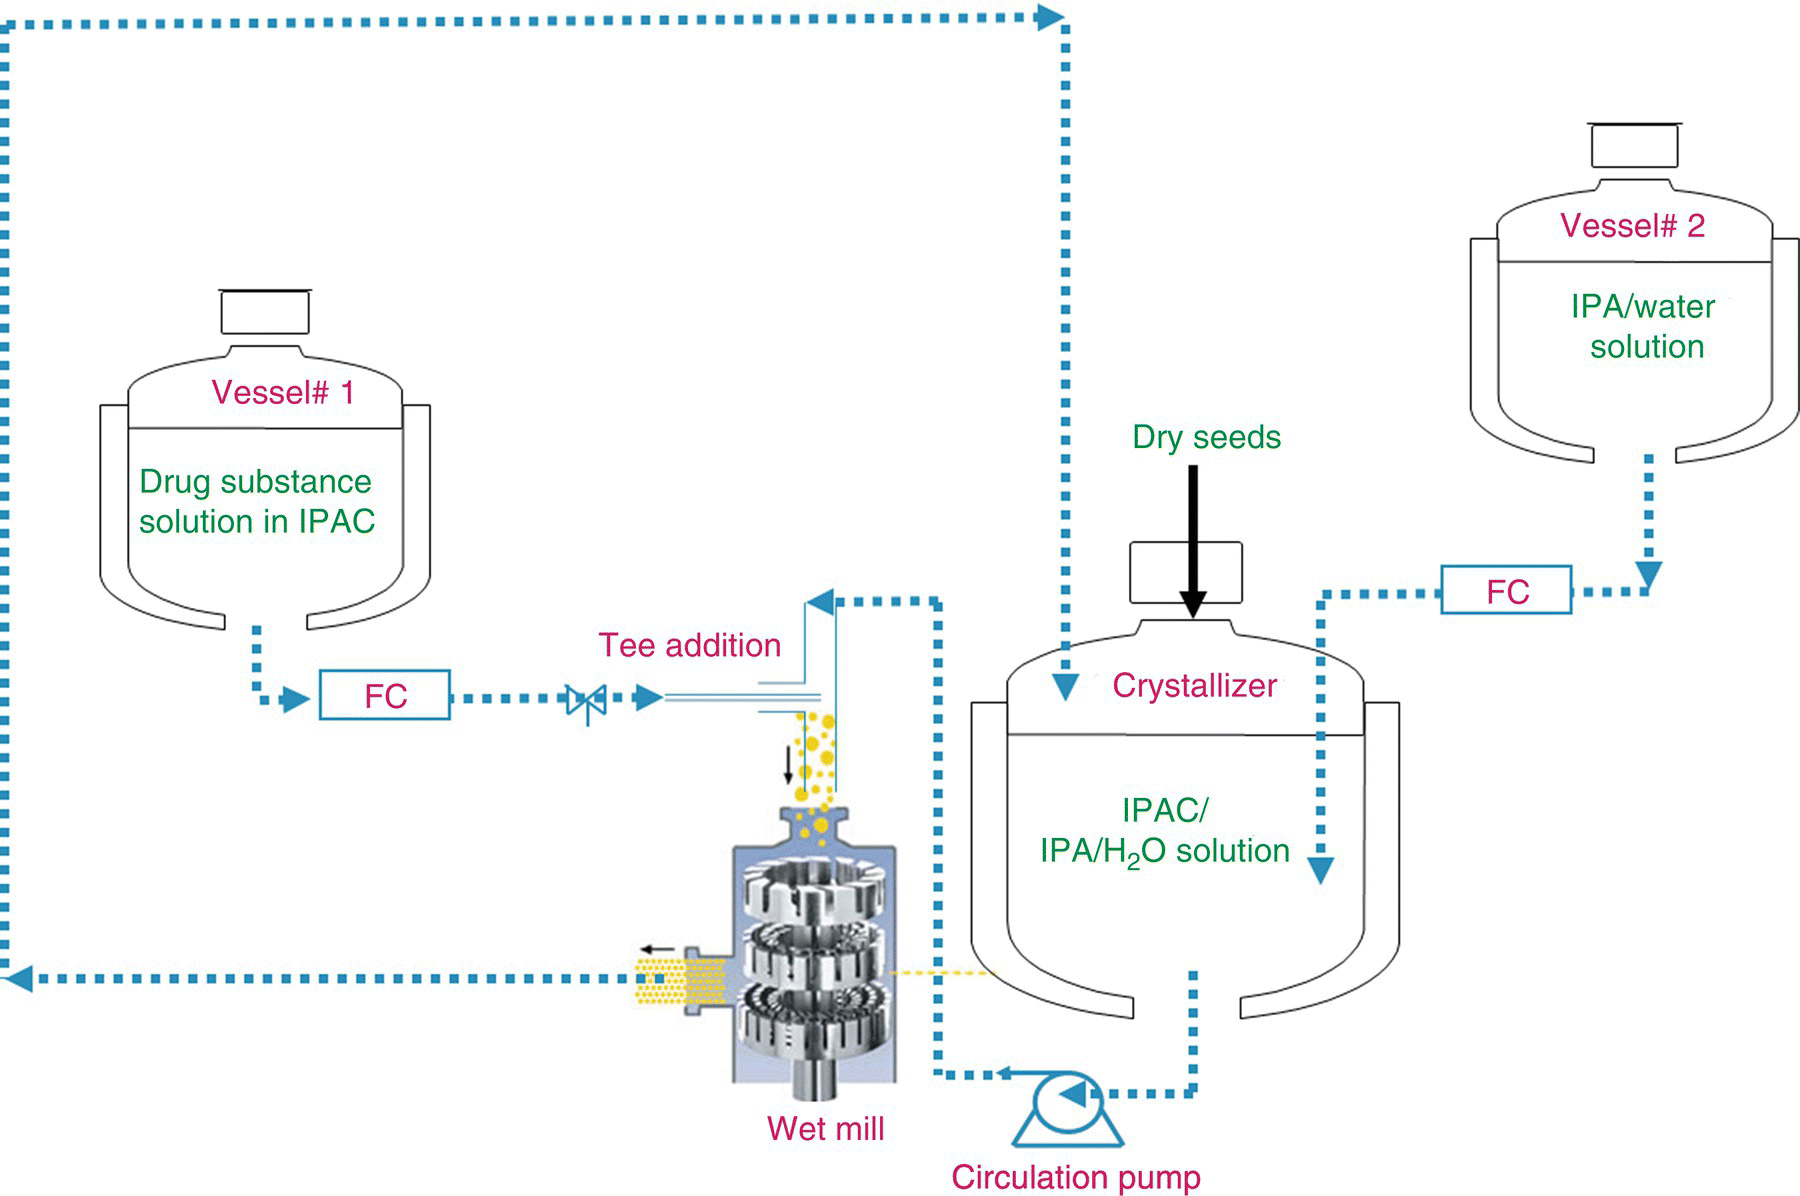 Schematic with arrows from a vessel#1 (drug substance solution in IPAC) to wet mill, to crystallizer (IPAC/IPA/H2O solution), to circulation pump, back to wet mill. The crystallizer has arrows from dry seeds and vessel#2.